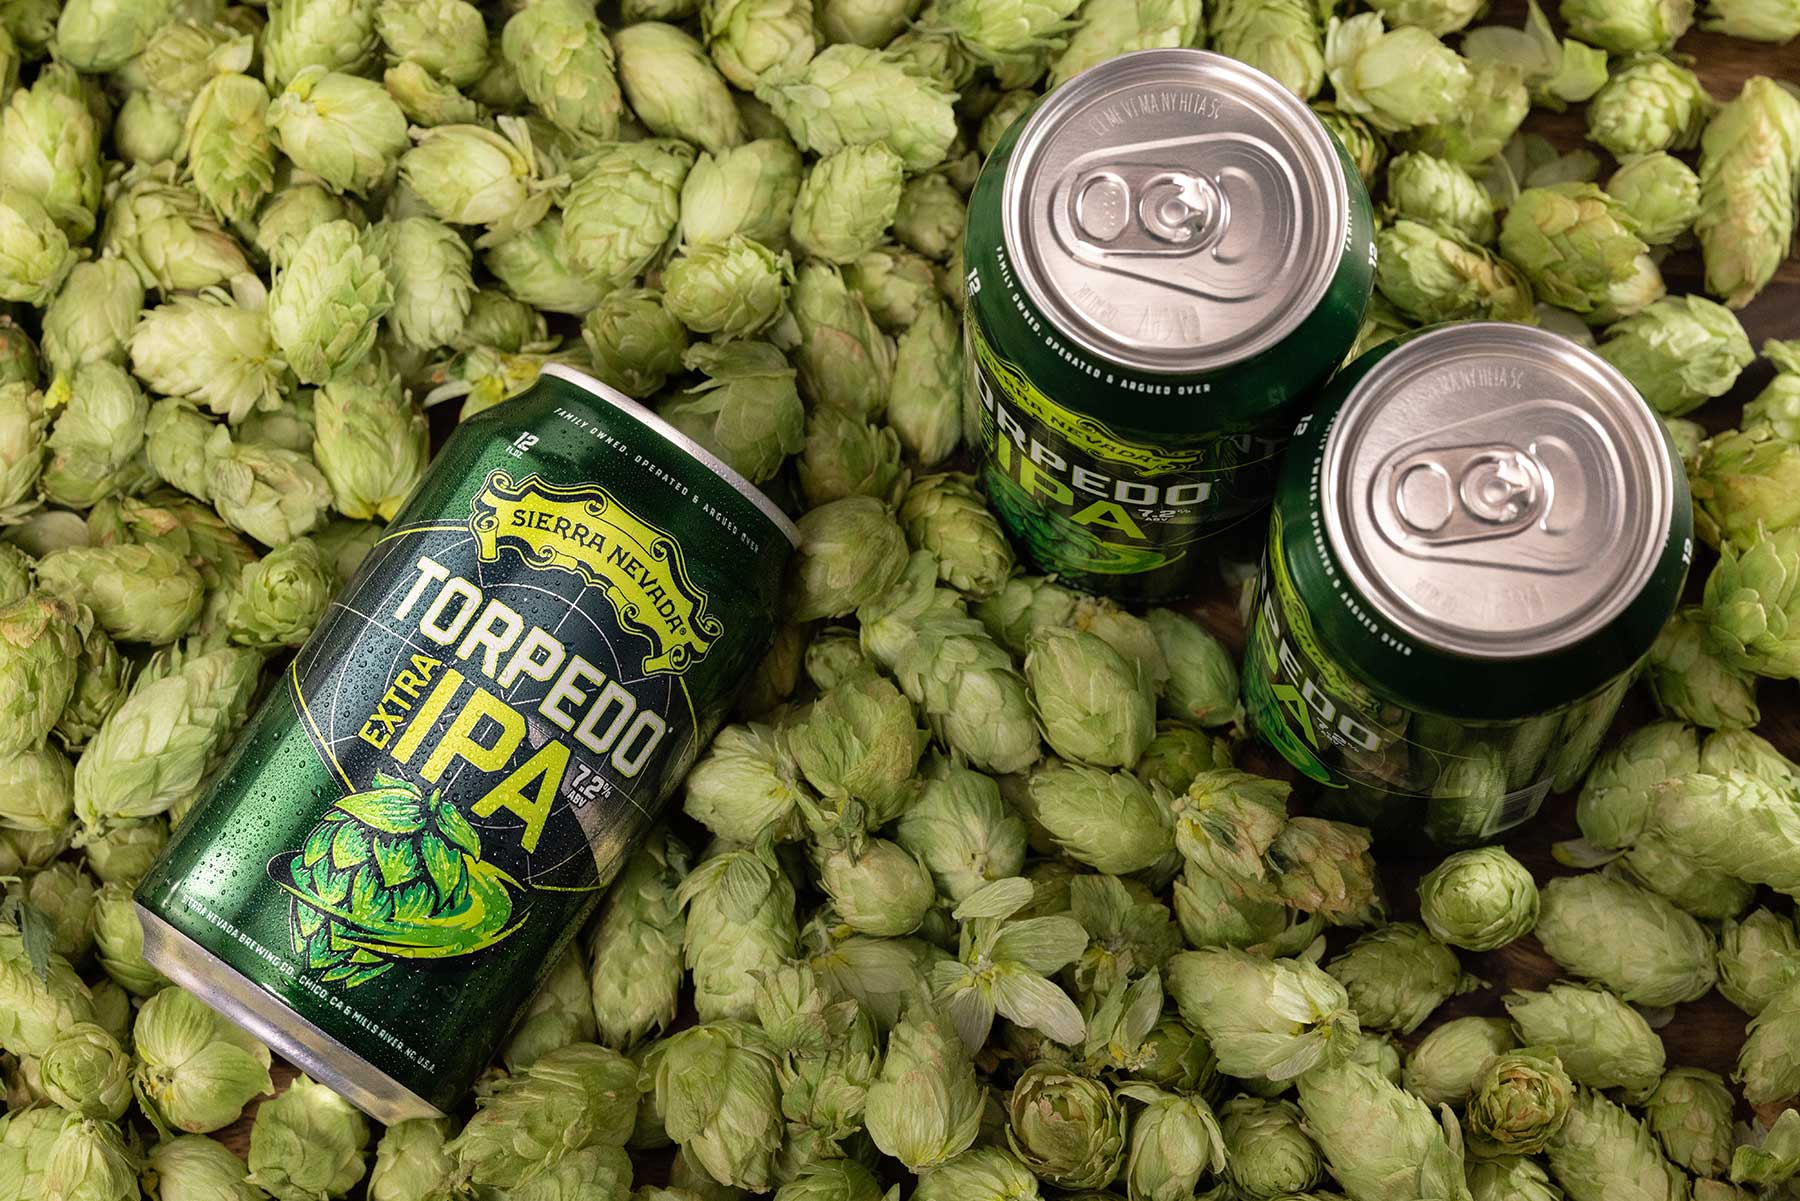 Three cans of Sierra Nevada Torpedo IPA in a bed of hops